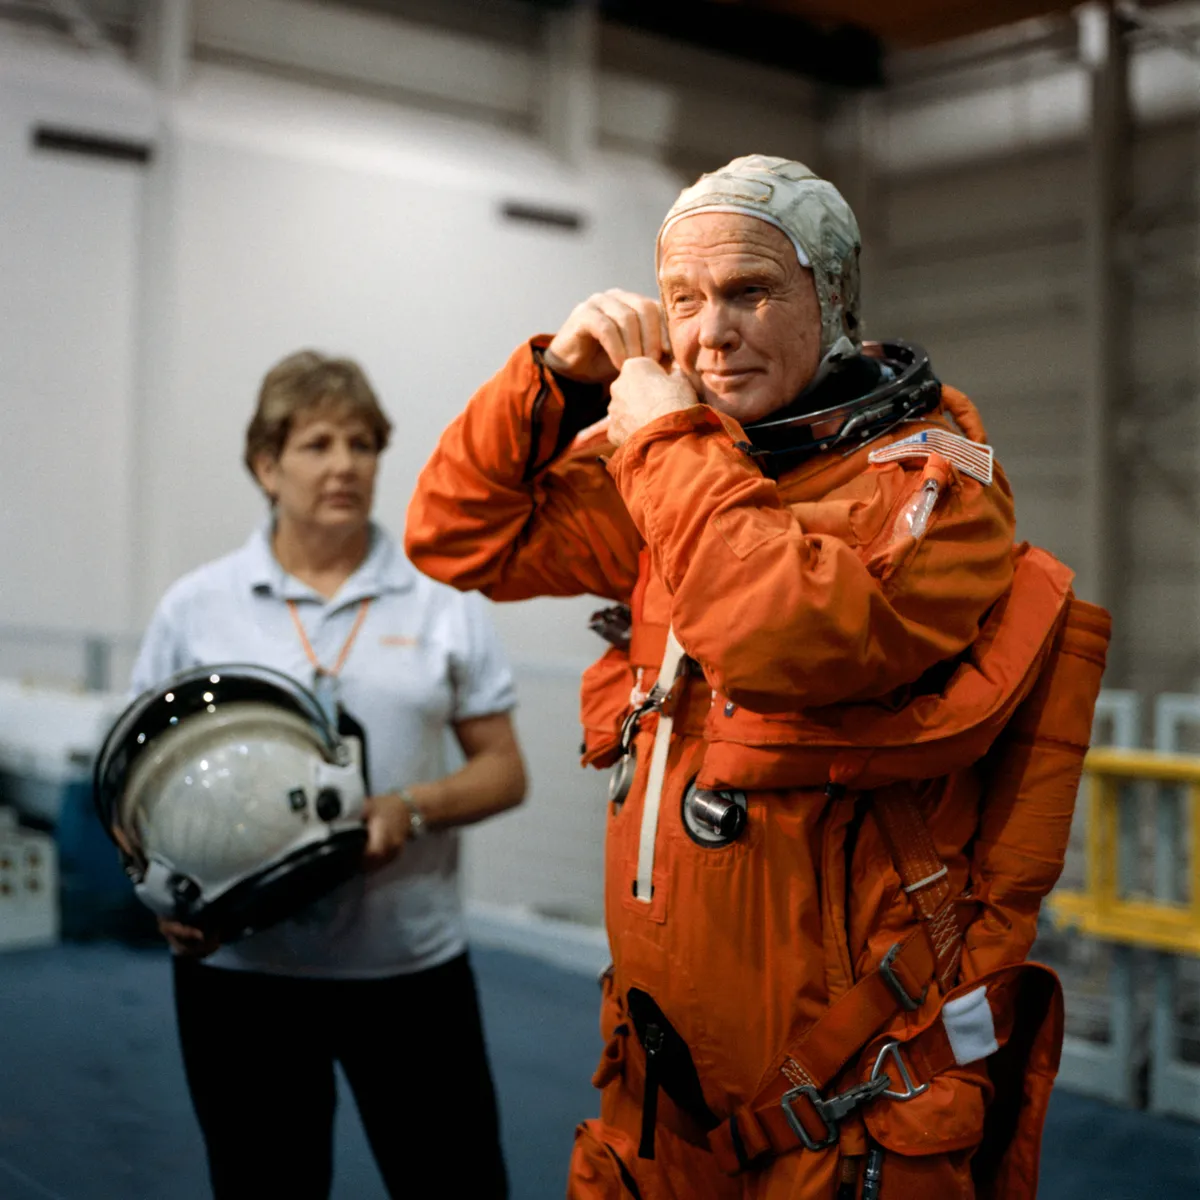 US Senator John Glenn during training for the Discovery STS-95 mission, which launched on 29 October 1998. Glenn had become the first man to orbit Earth in 1962, and his last mission saw him become the oldest person to fly in space. Credit: NASA